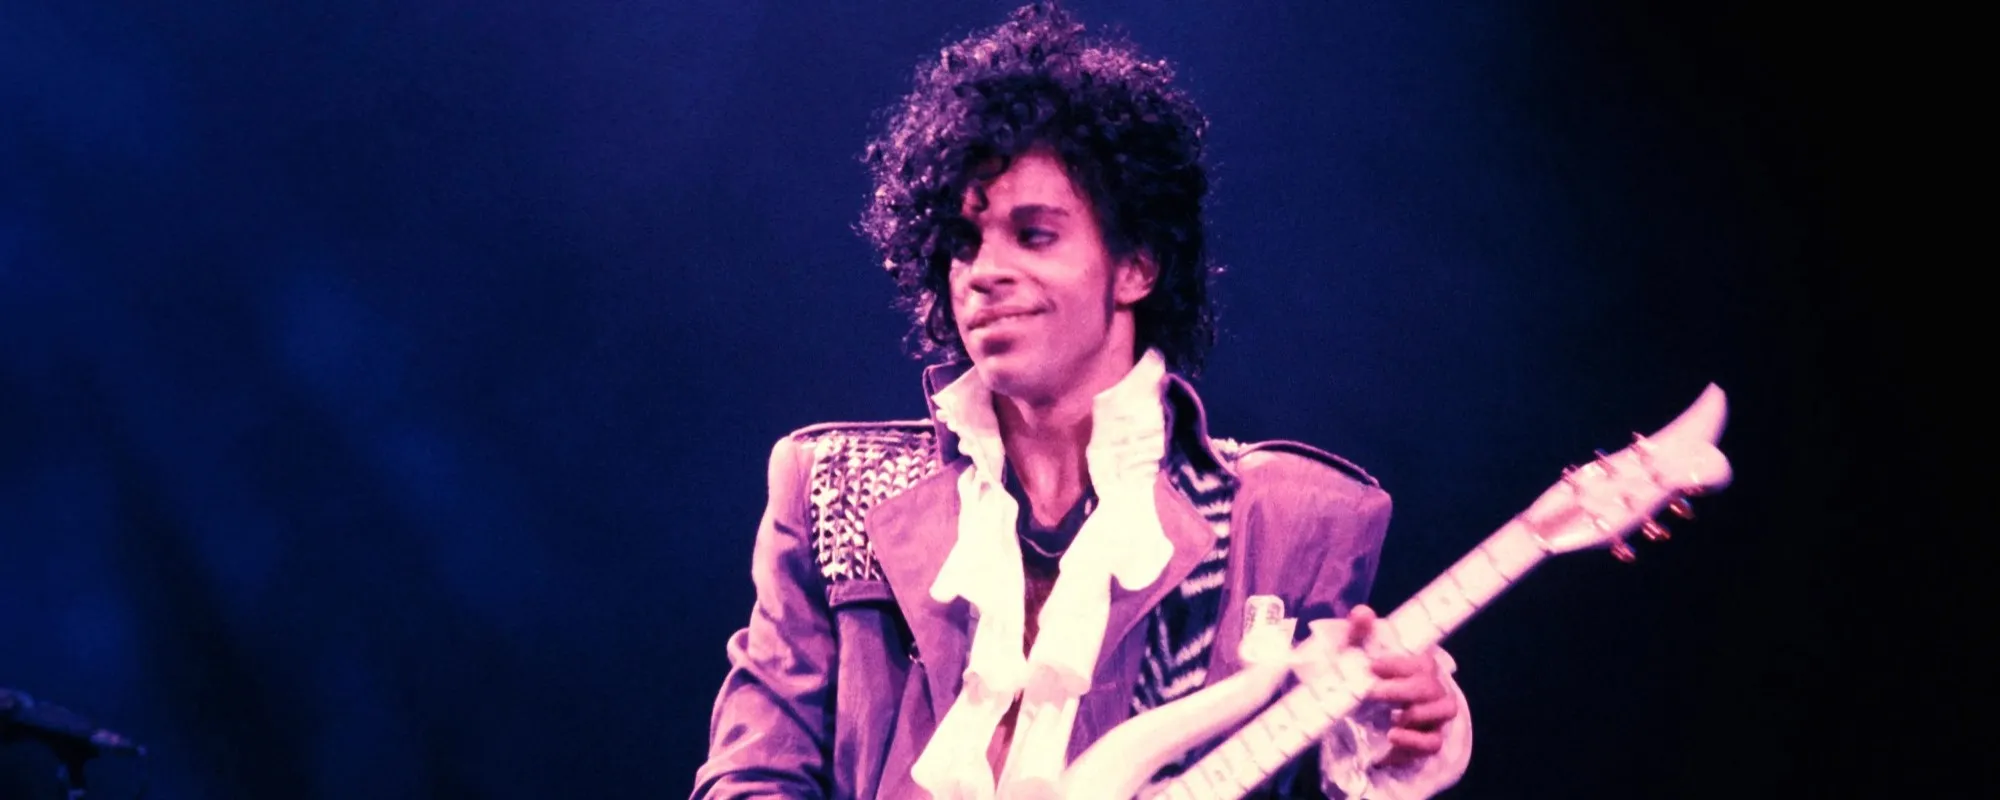 Prince’s ‘Purple Rain’ Movie Being Adapted into Stage Musical